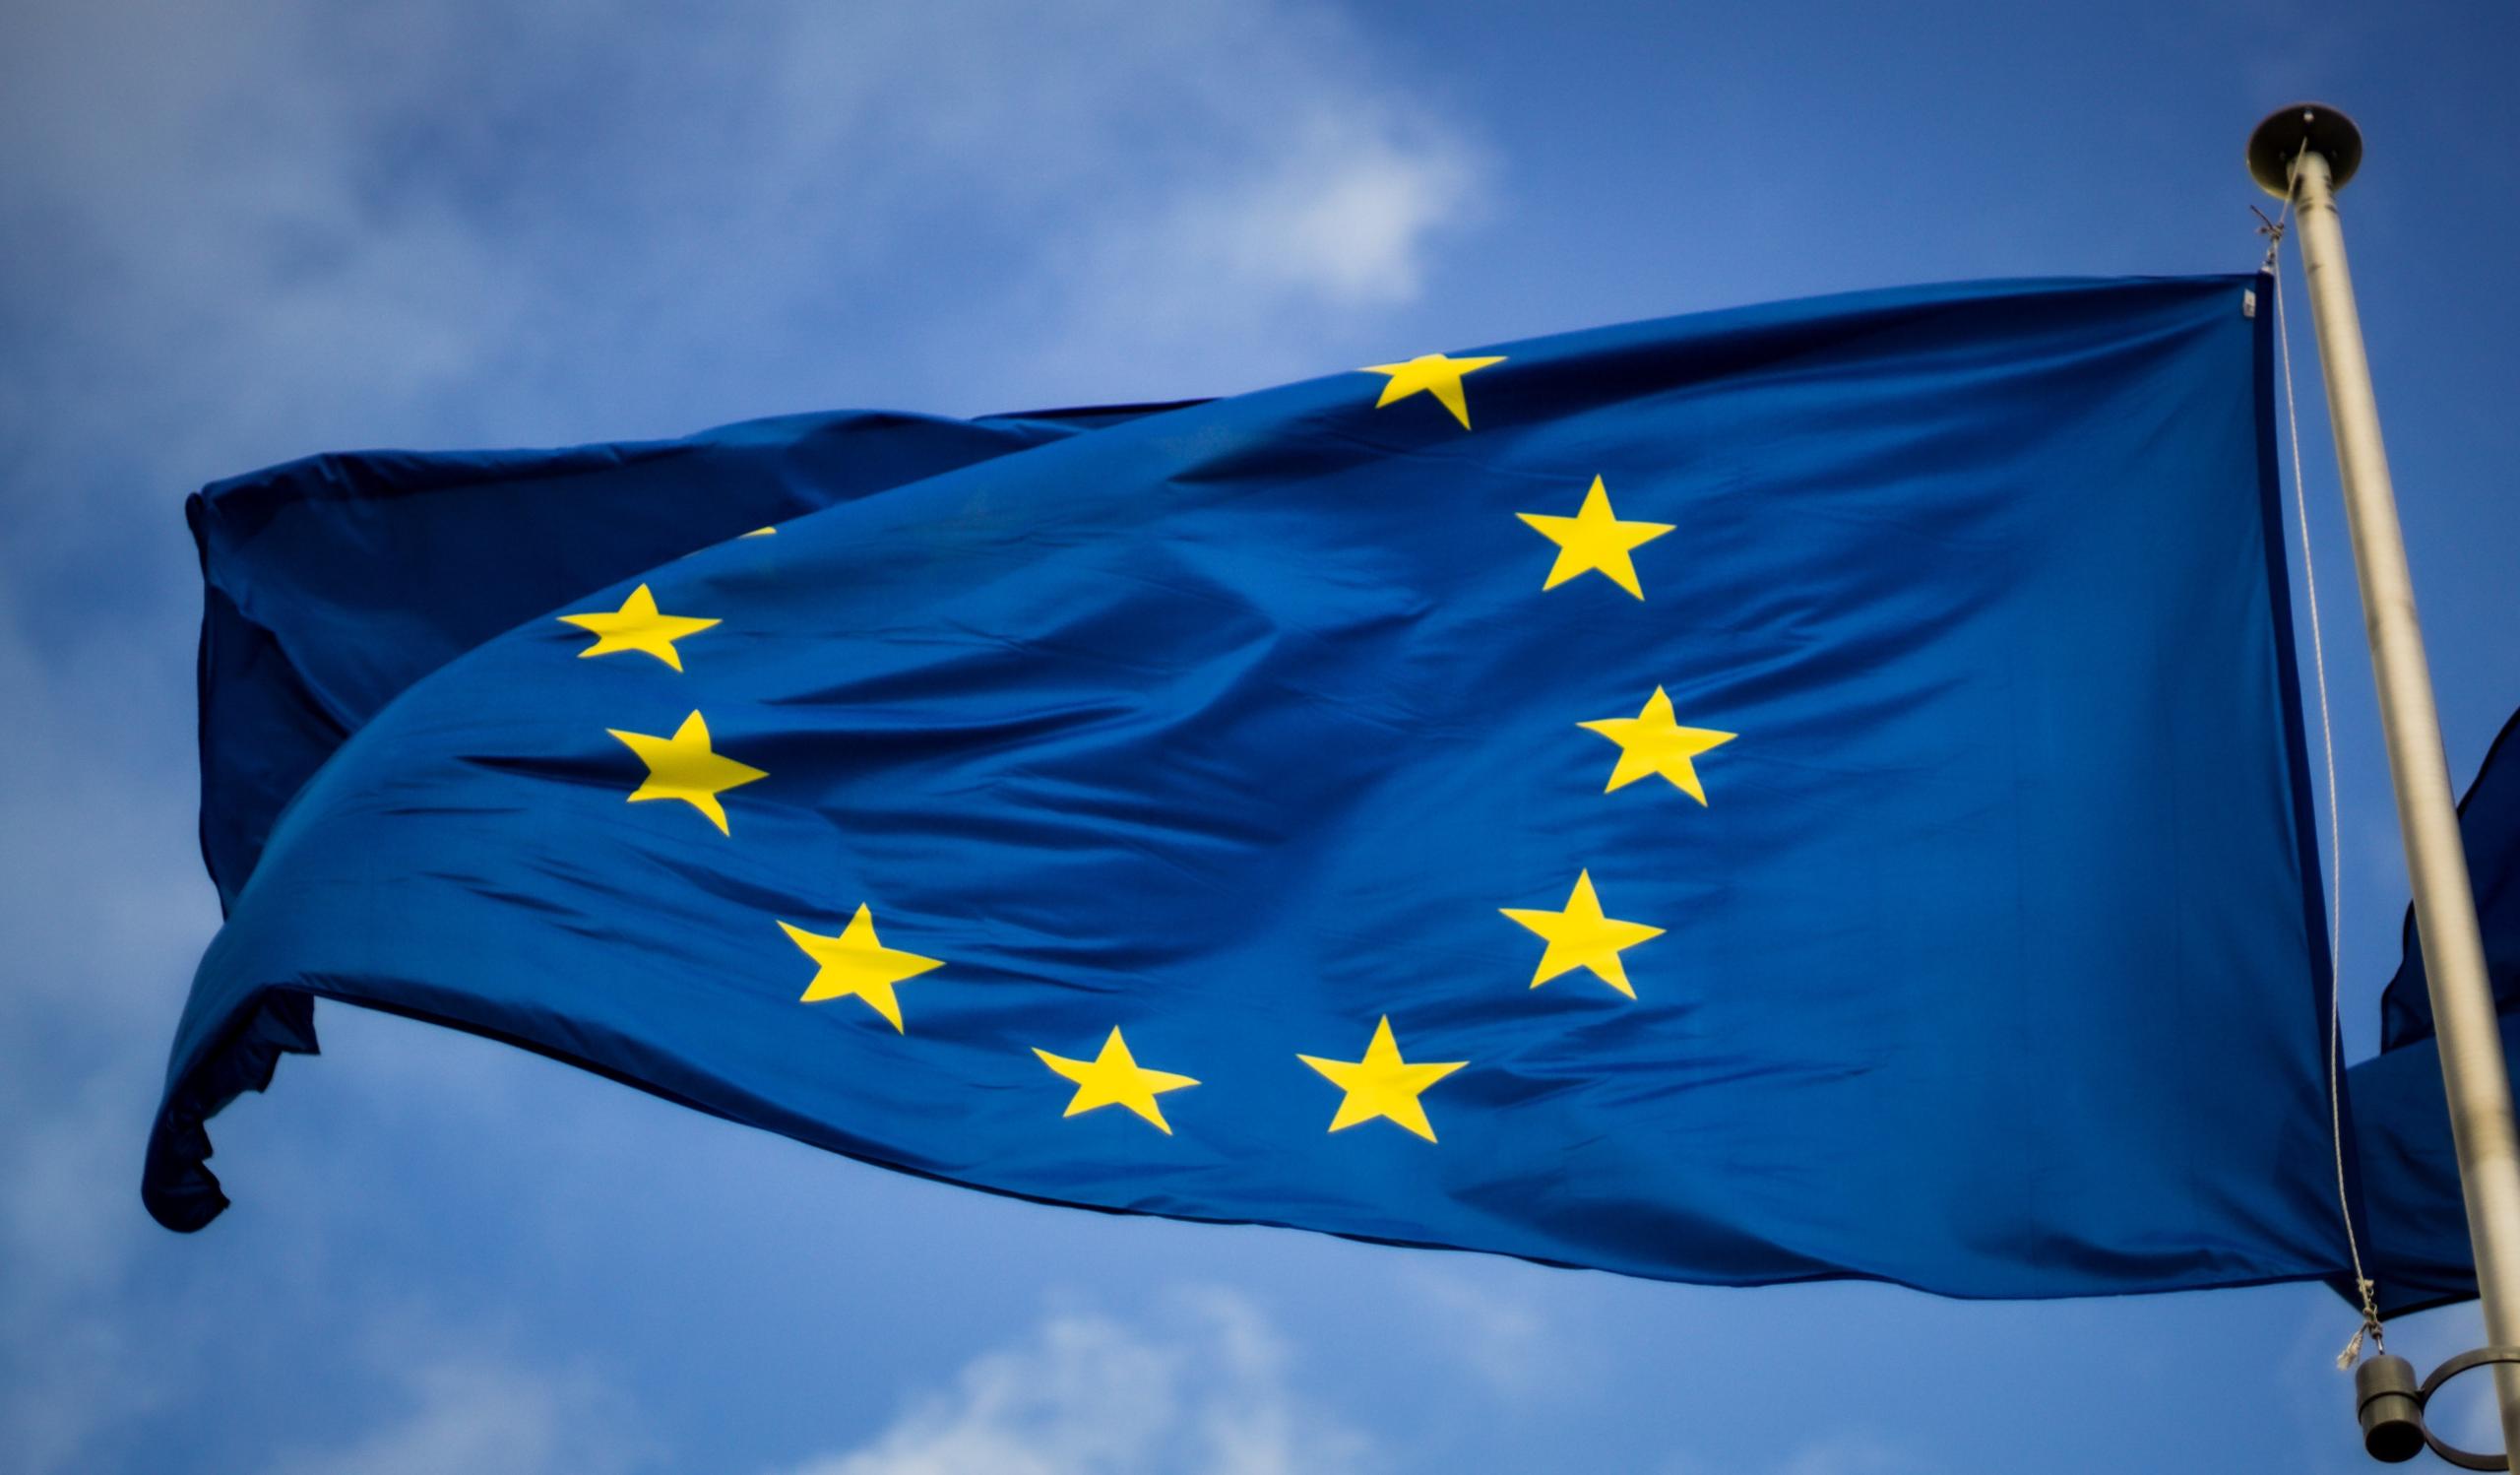 Europe flag with yellow stars on blue background fluttering in the wind